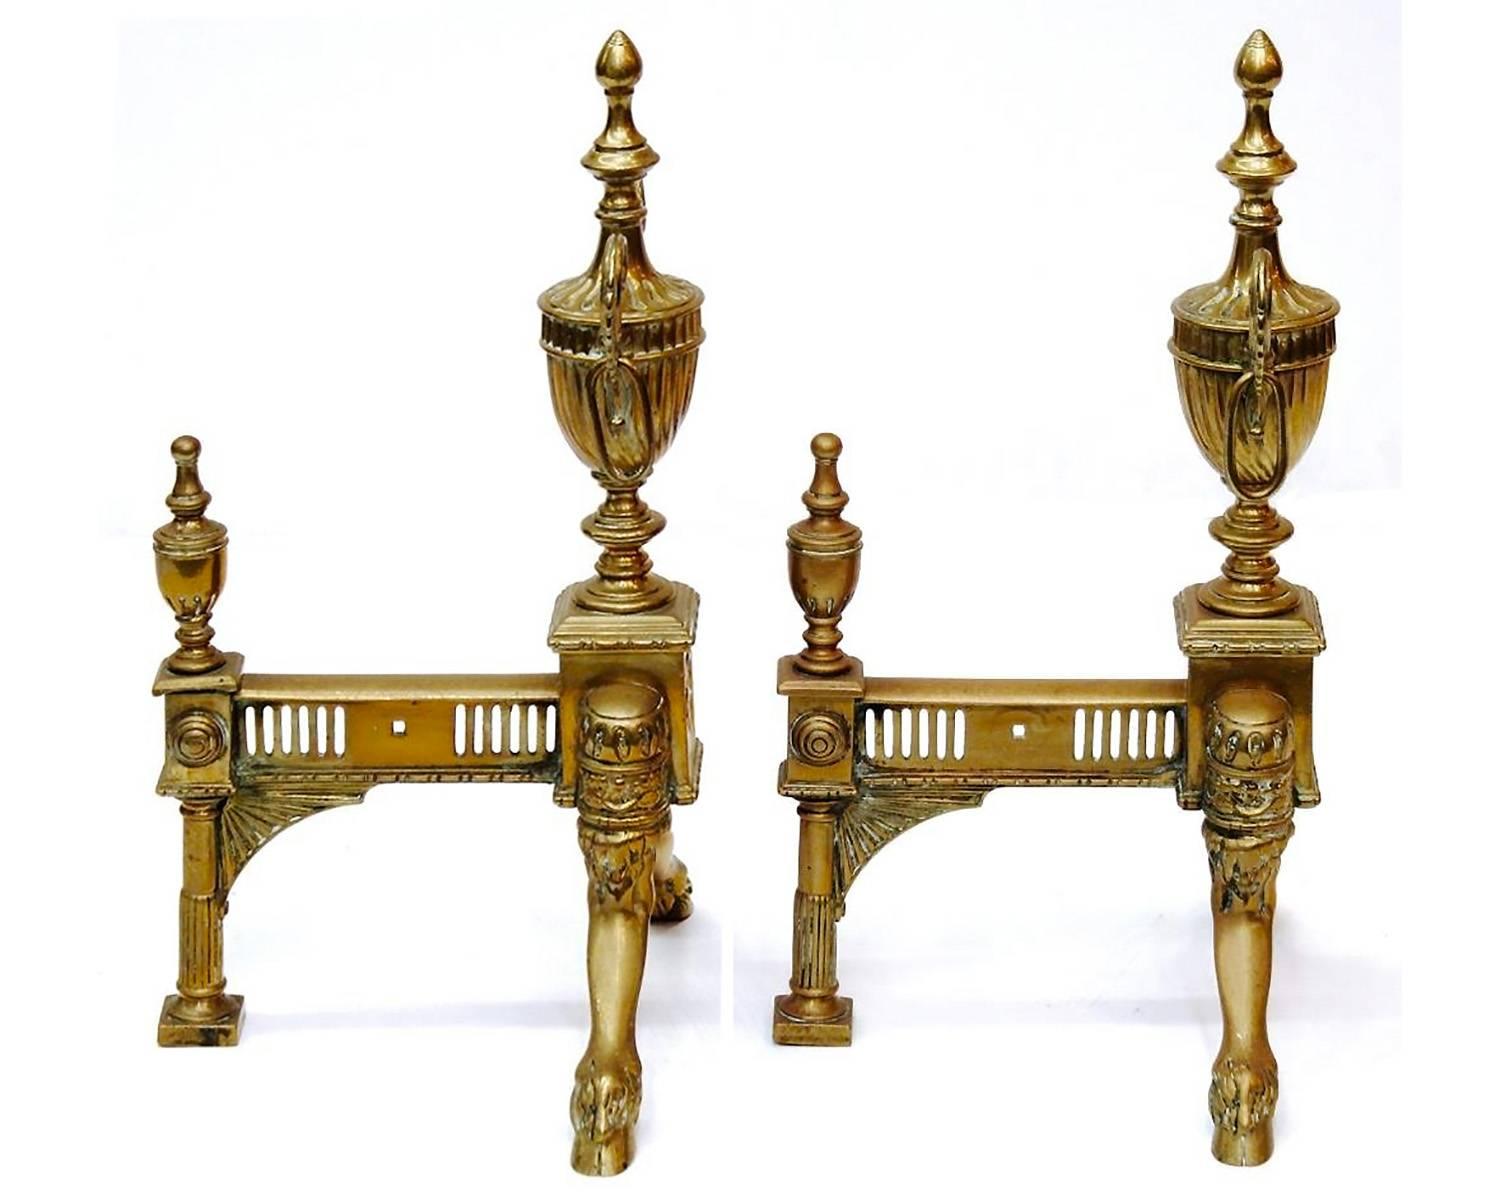 Cast Pair of Neoclassical Style Gilt Brass Andirons with Urn Finials